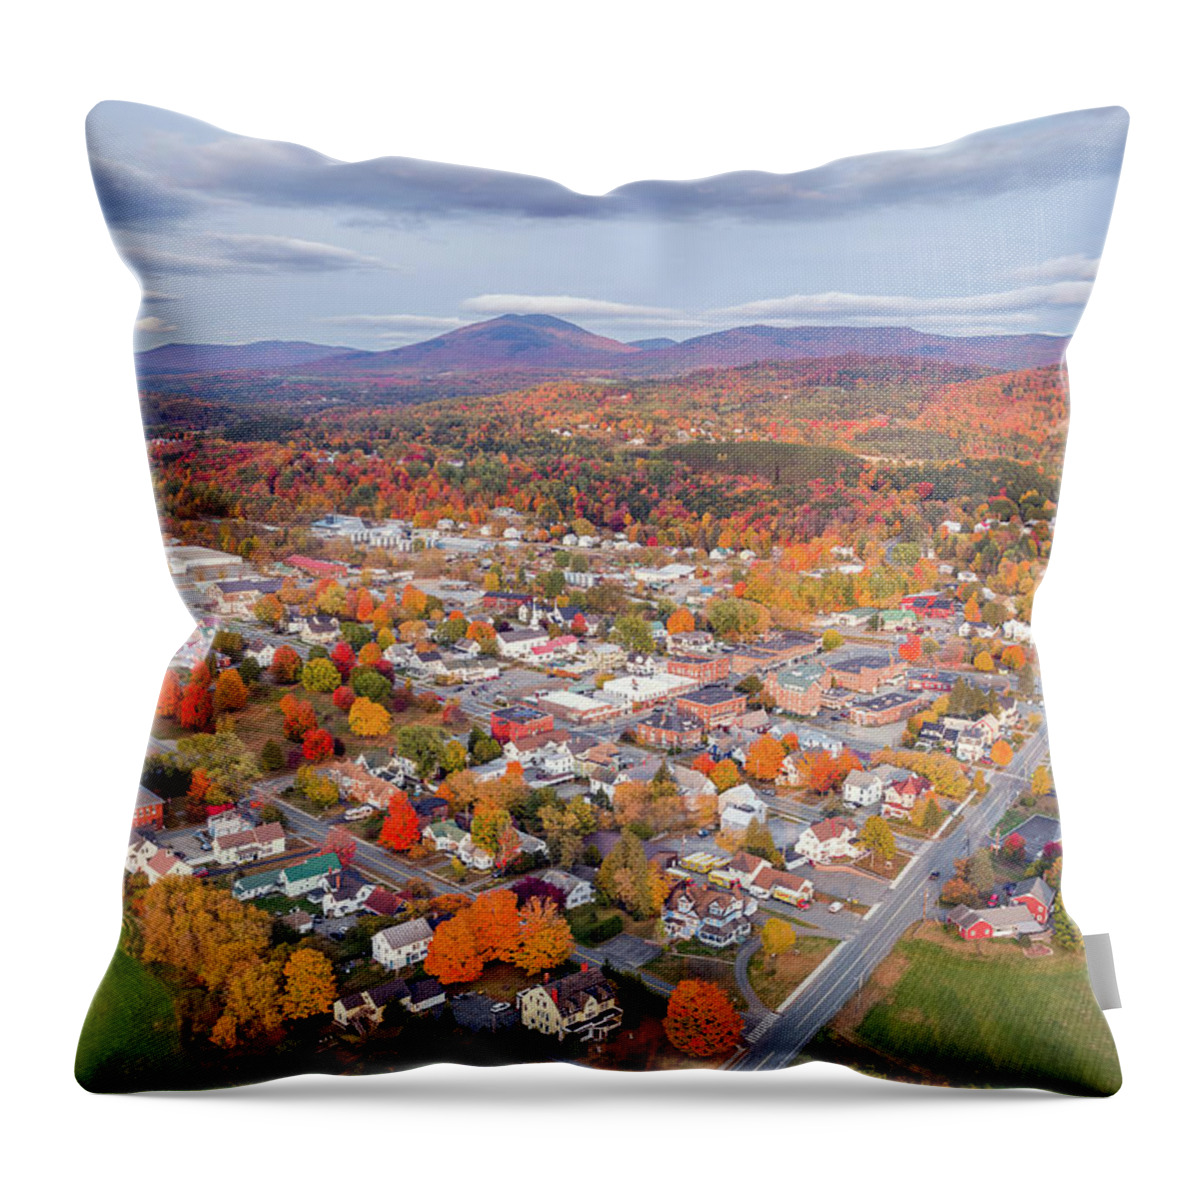 Fall Throw Pillow featuring the photograph Fall Foliage In Lyndonville, Vermont - September 2020 by John Rowe